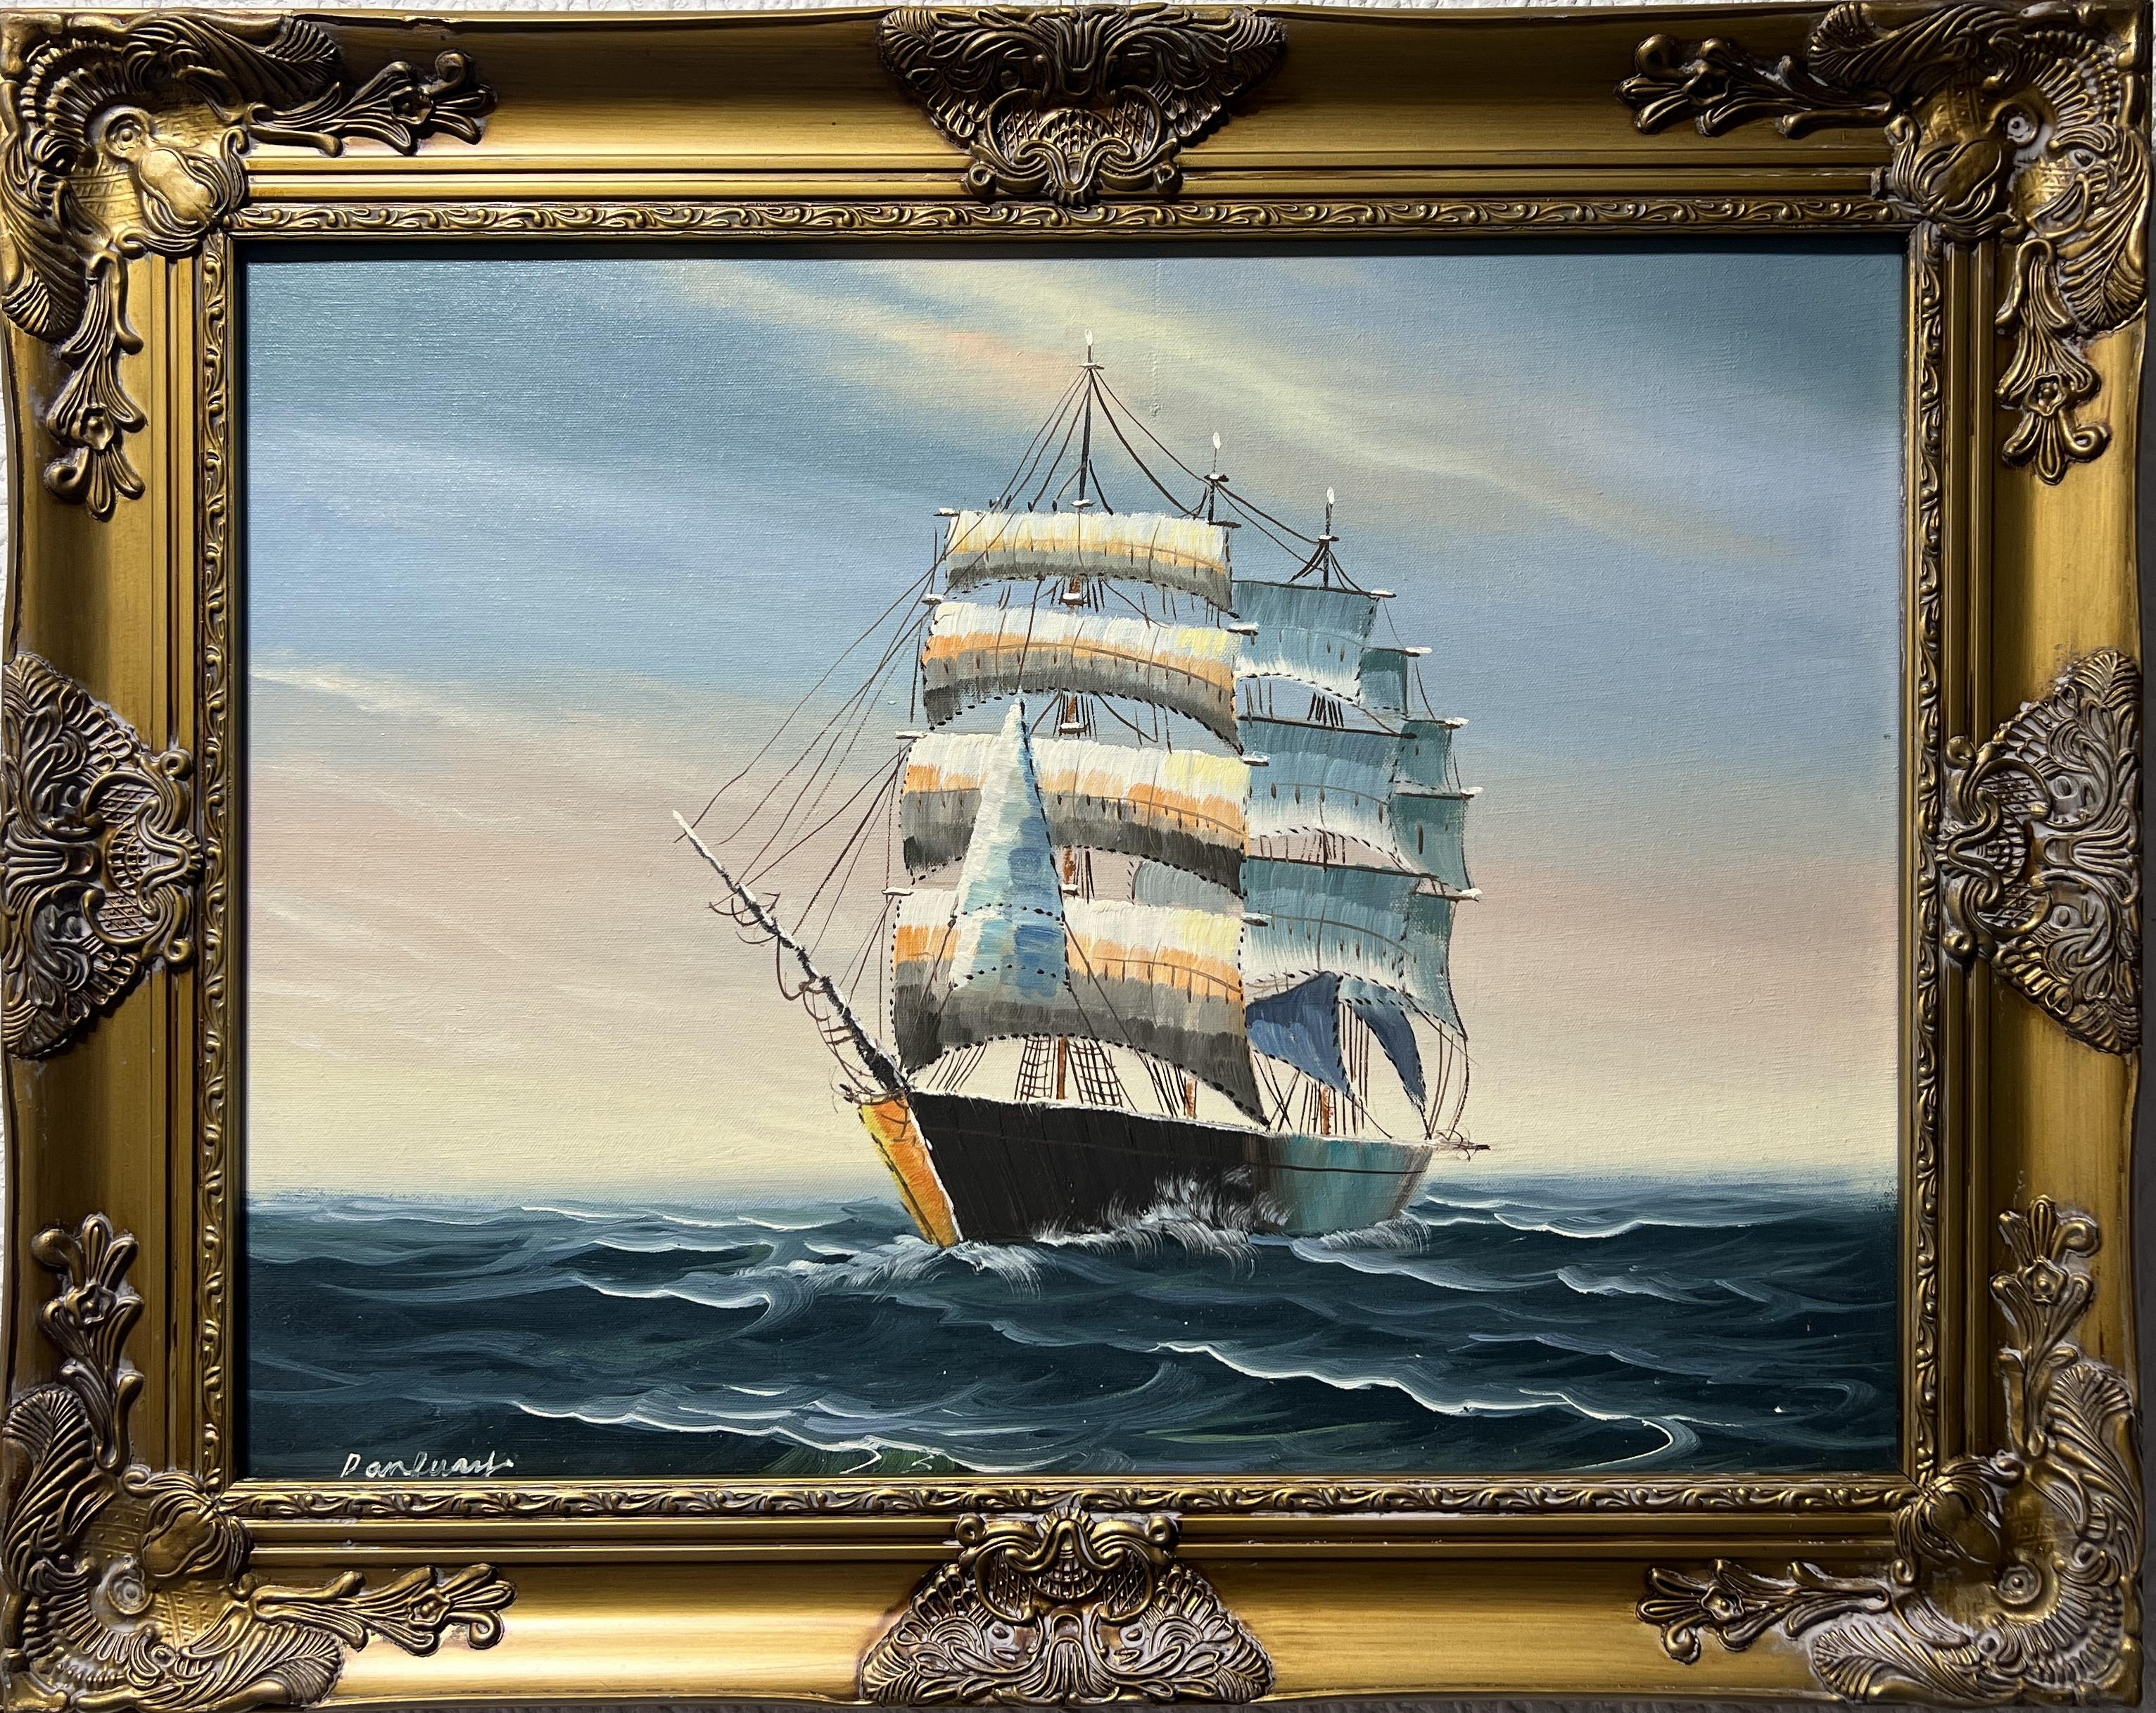 Unknown Landscape Painting - Original Oil painting on canvas, seascape, Sailing Ship, signed, Gold Frame